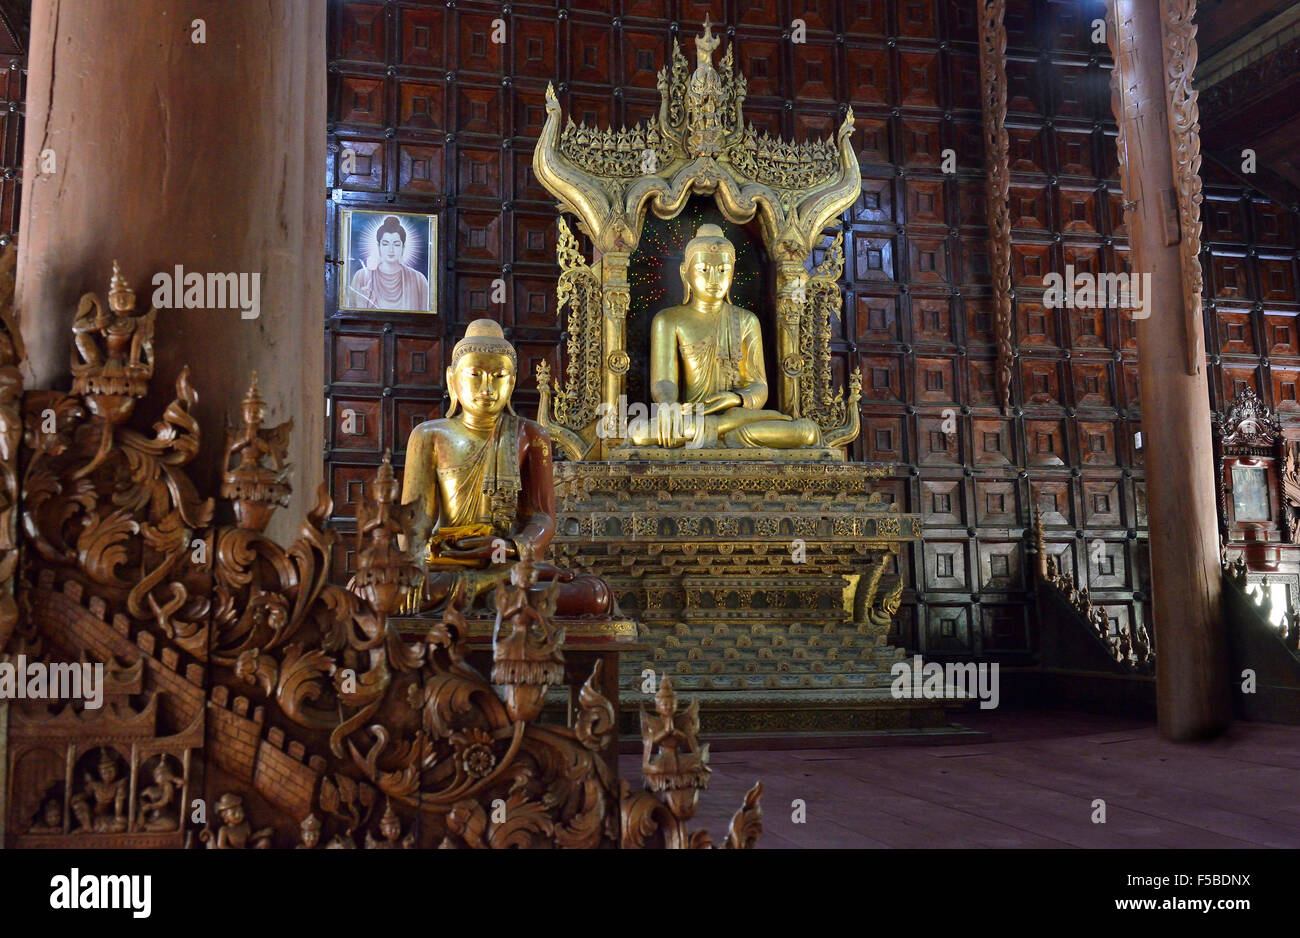 Interior with  central   golden buddha in  the historic teak wood temple of  Shwe in bin Kyaung in Mandalay, Myanmar, formerly Burma Stock Photo